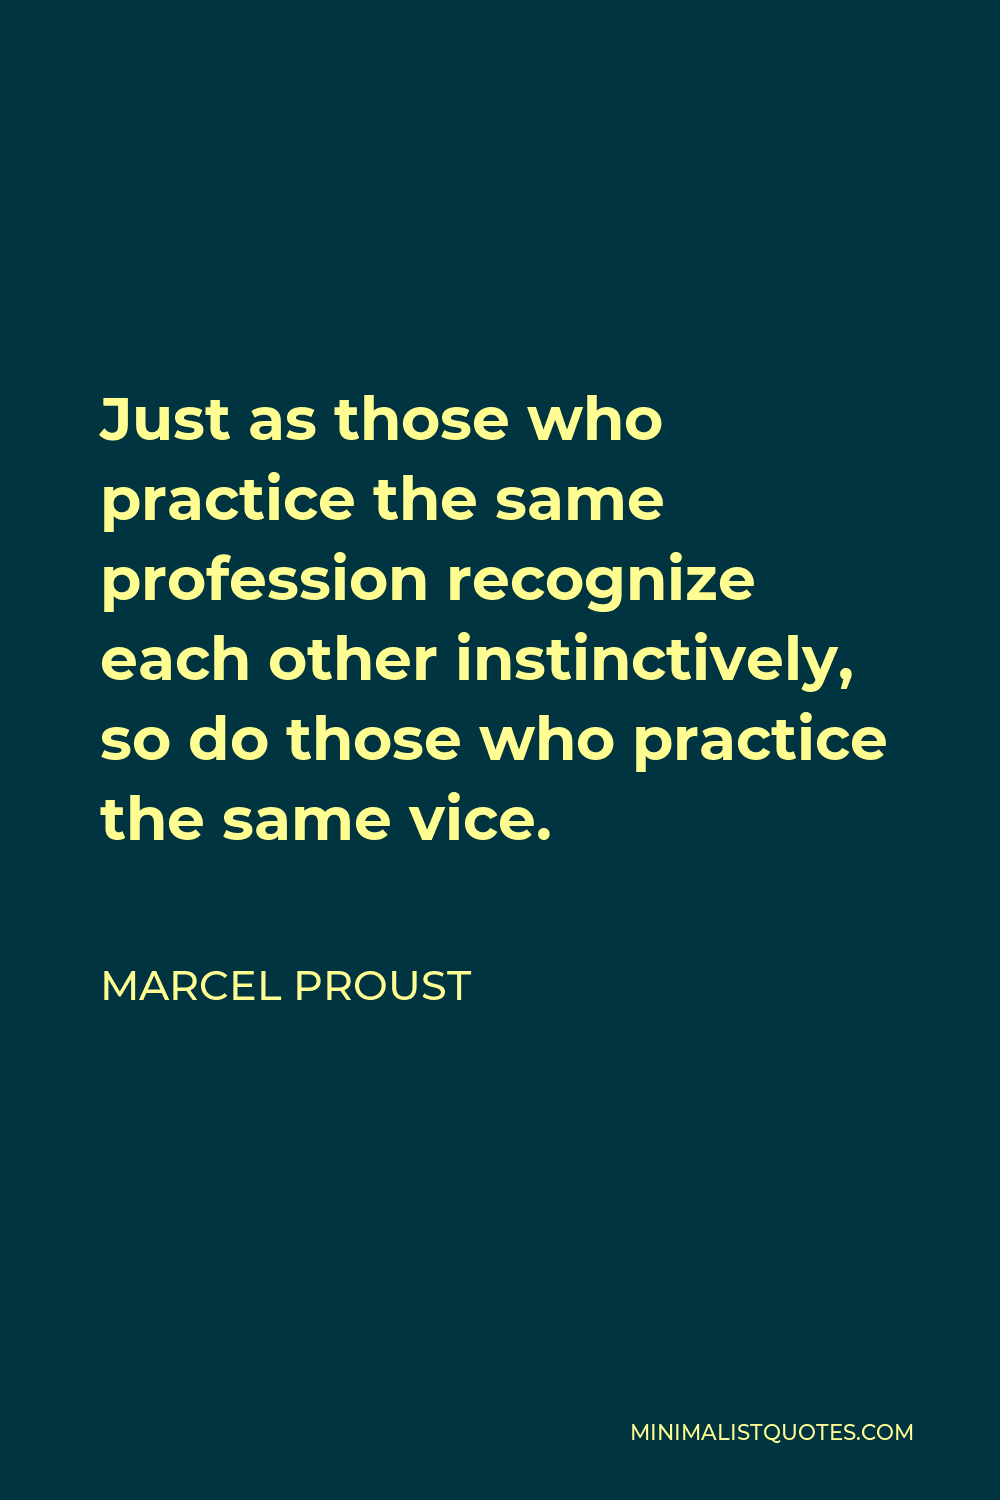 Marcel Proust Quote - Just as those who practice the same profession recognize each other instinctively, so do those who practice the same vice.